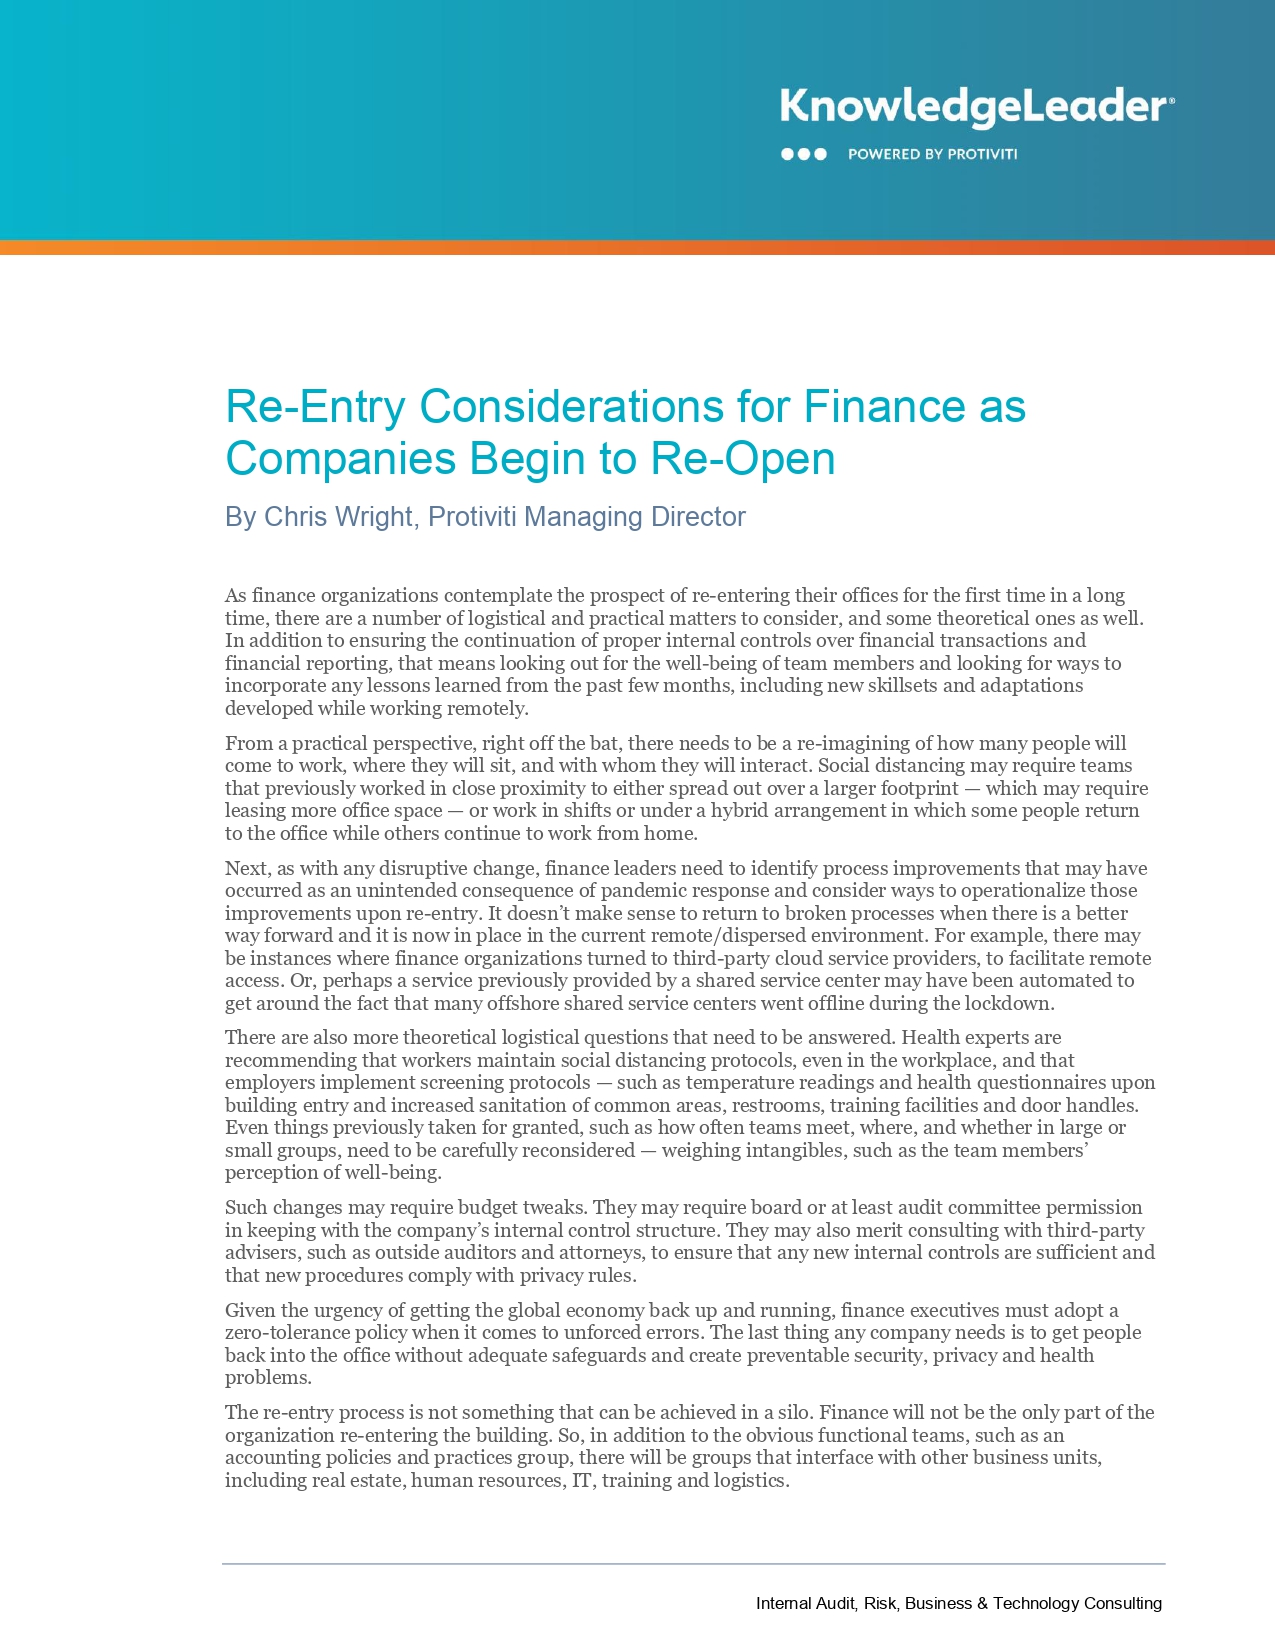 Re-Entry Considerations for Finance as Companies Begin to Re-Open